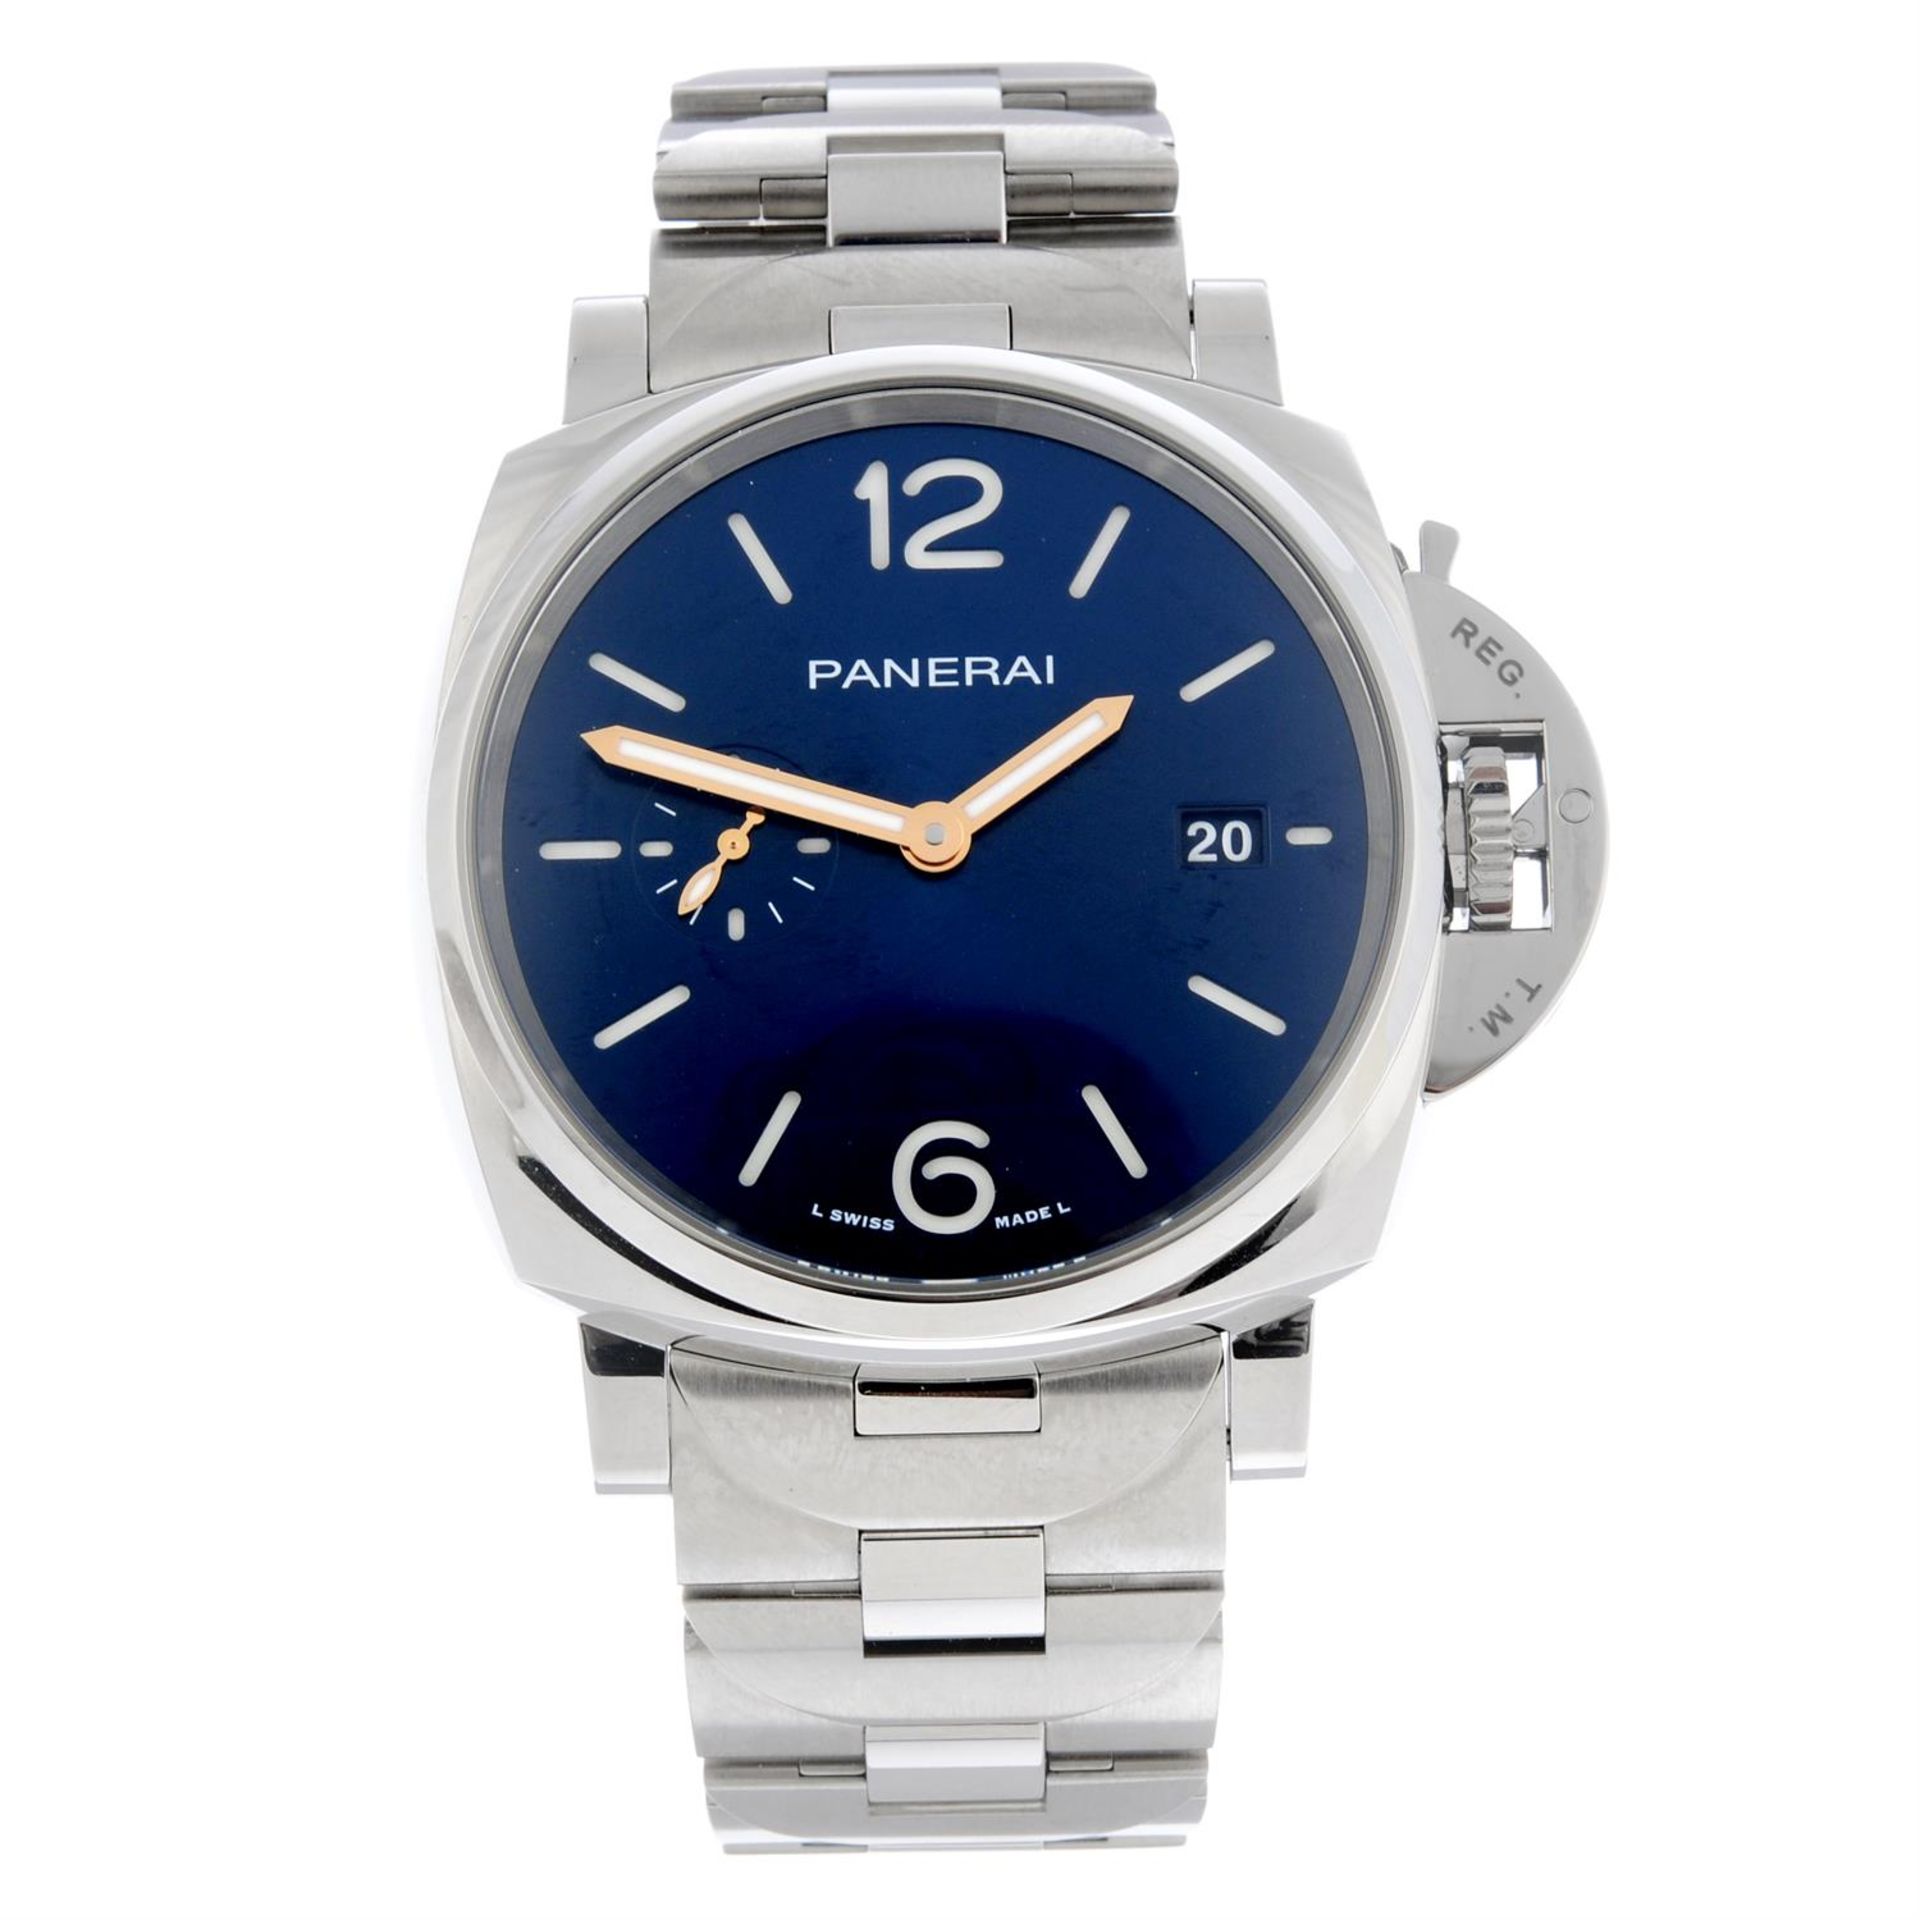 PANERAI - a limited edition stainless steel Luminor Due bracelet watch, 42mm.